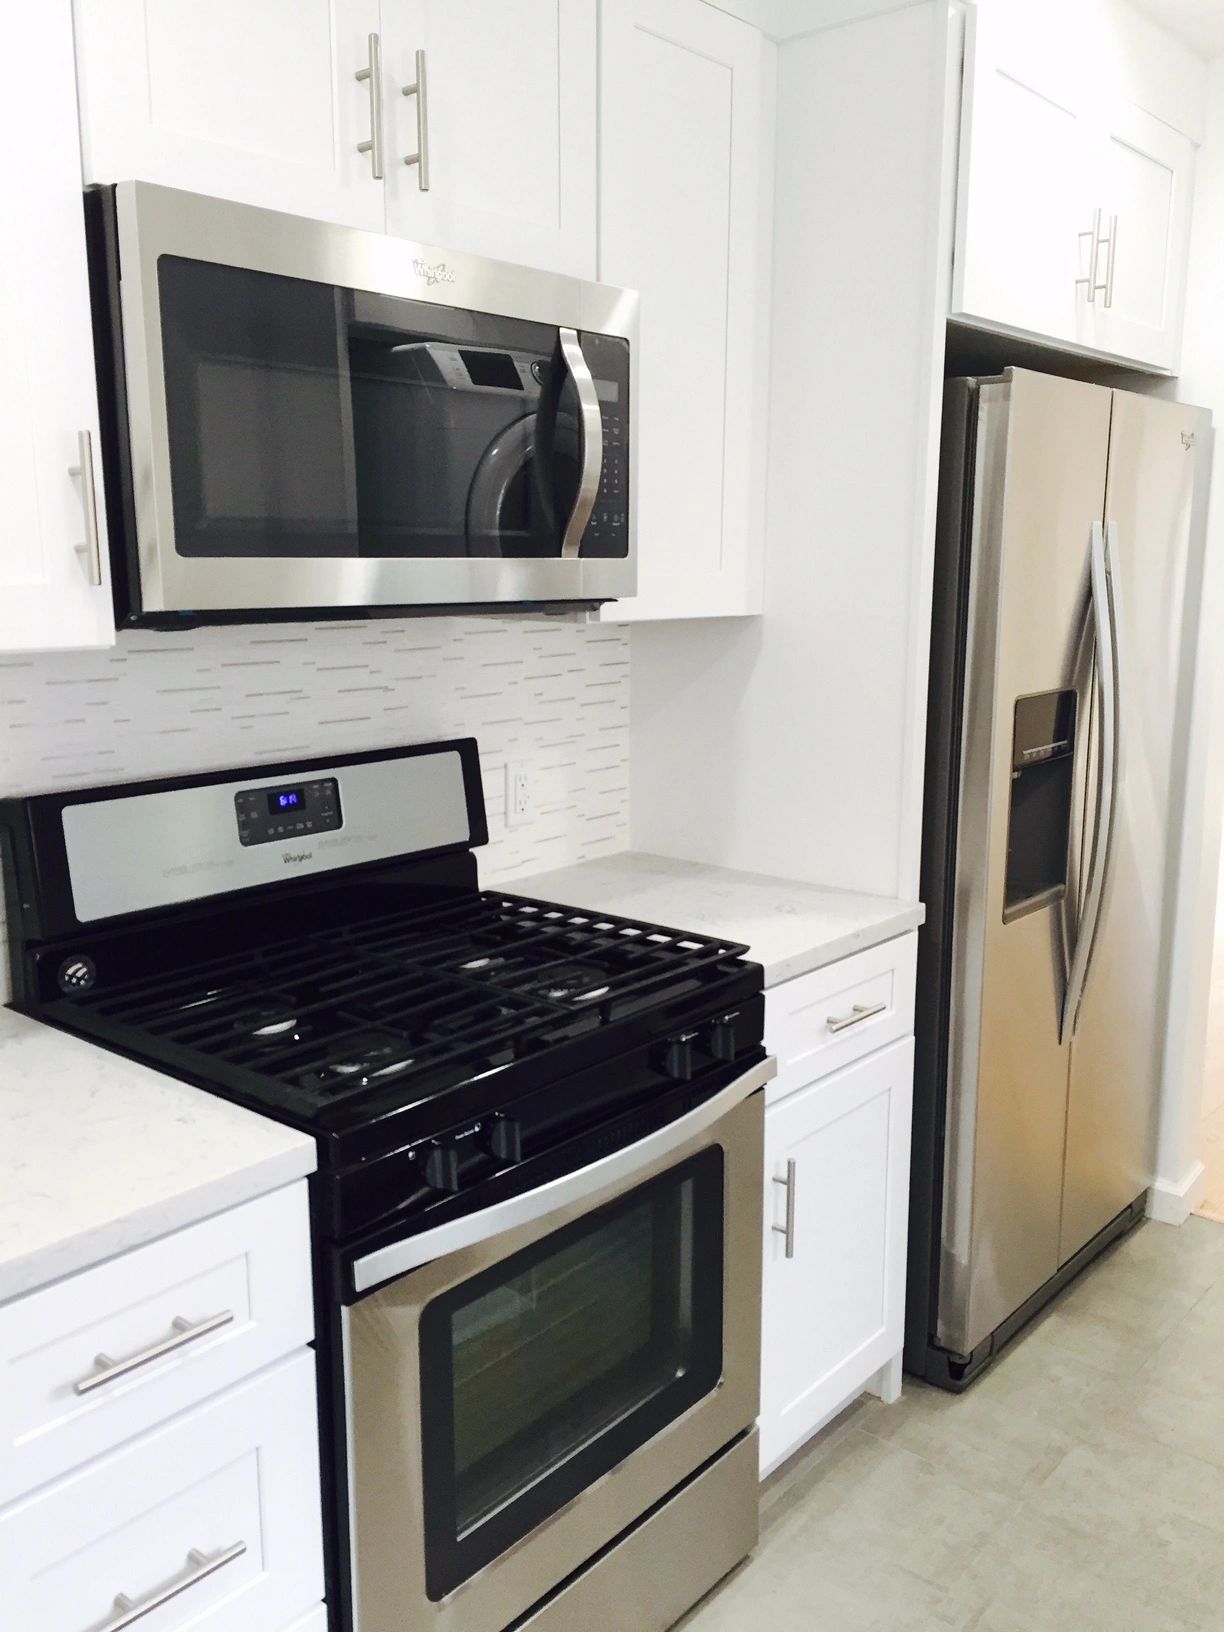 10x10 galley kitchen remodeling special for under 10.000 dollars including wooden kitchen cabinets a